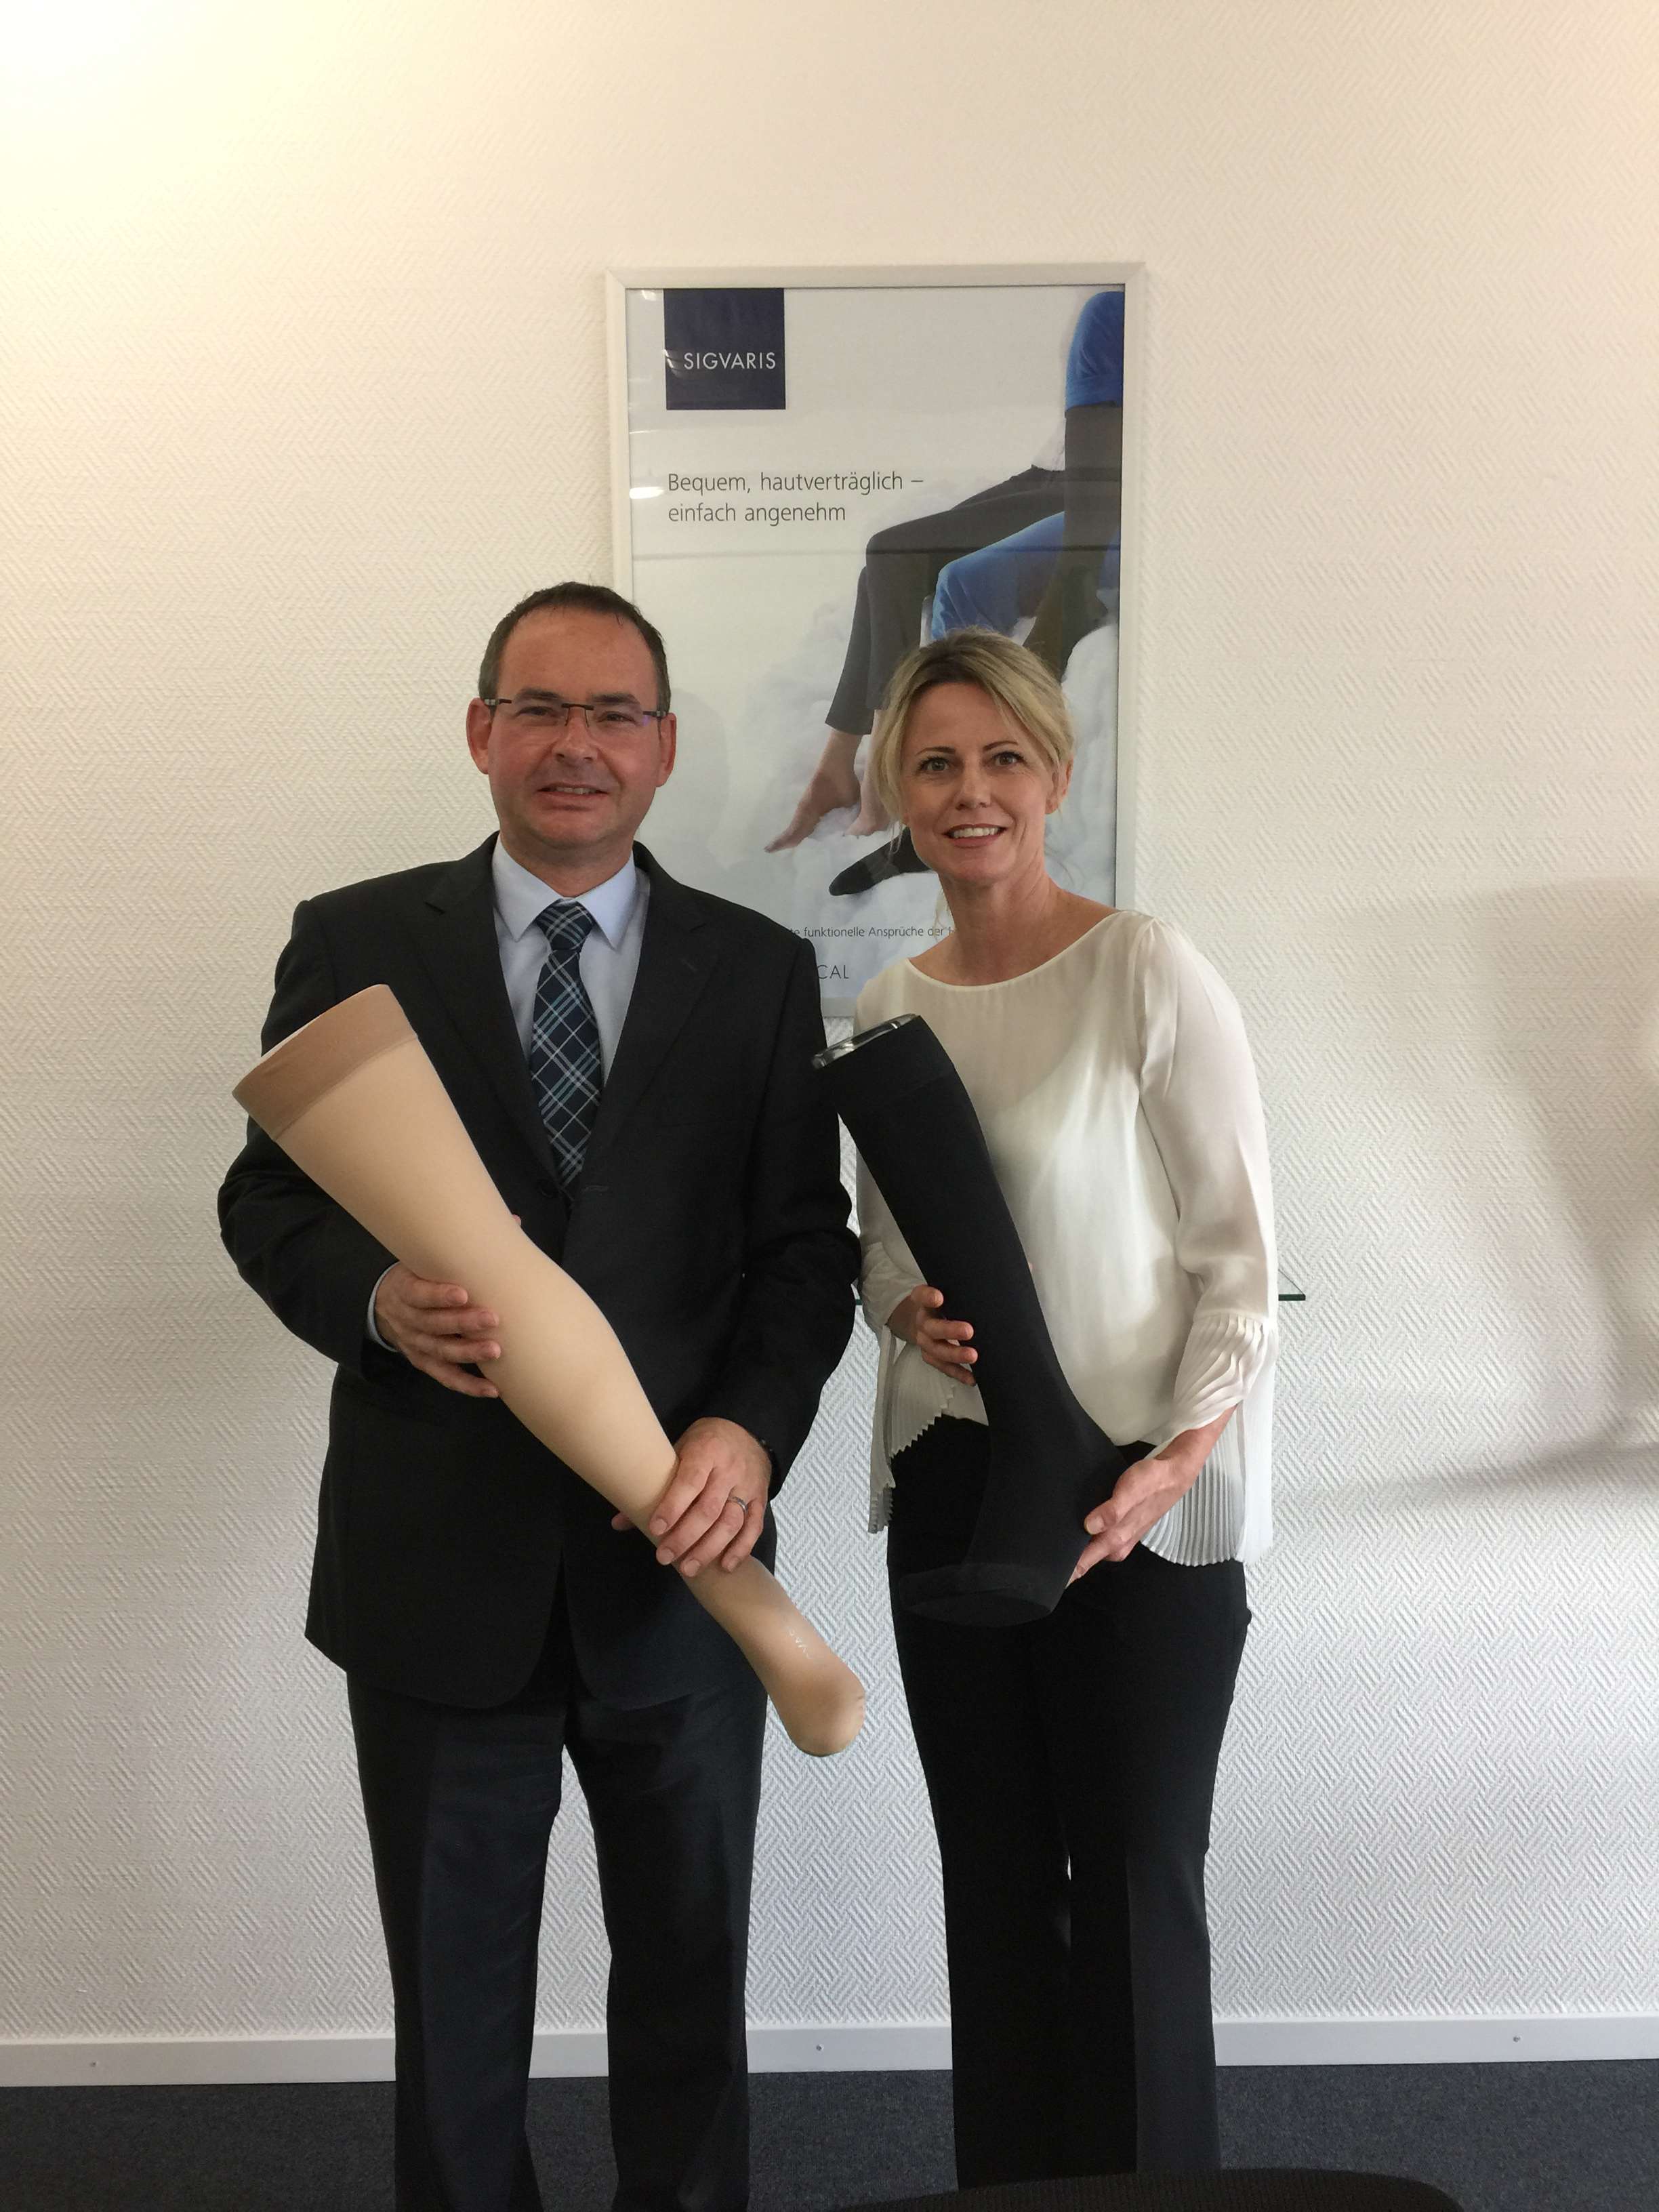 Christoph Künzler, chief financial officer; and Bettina Moosmann, head of corporate communications